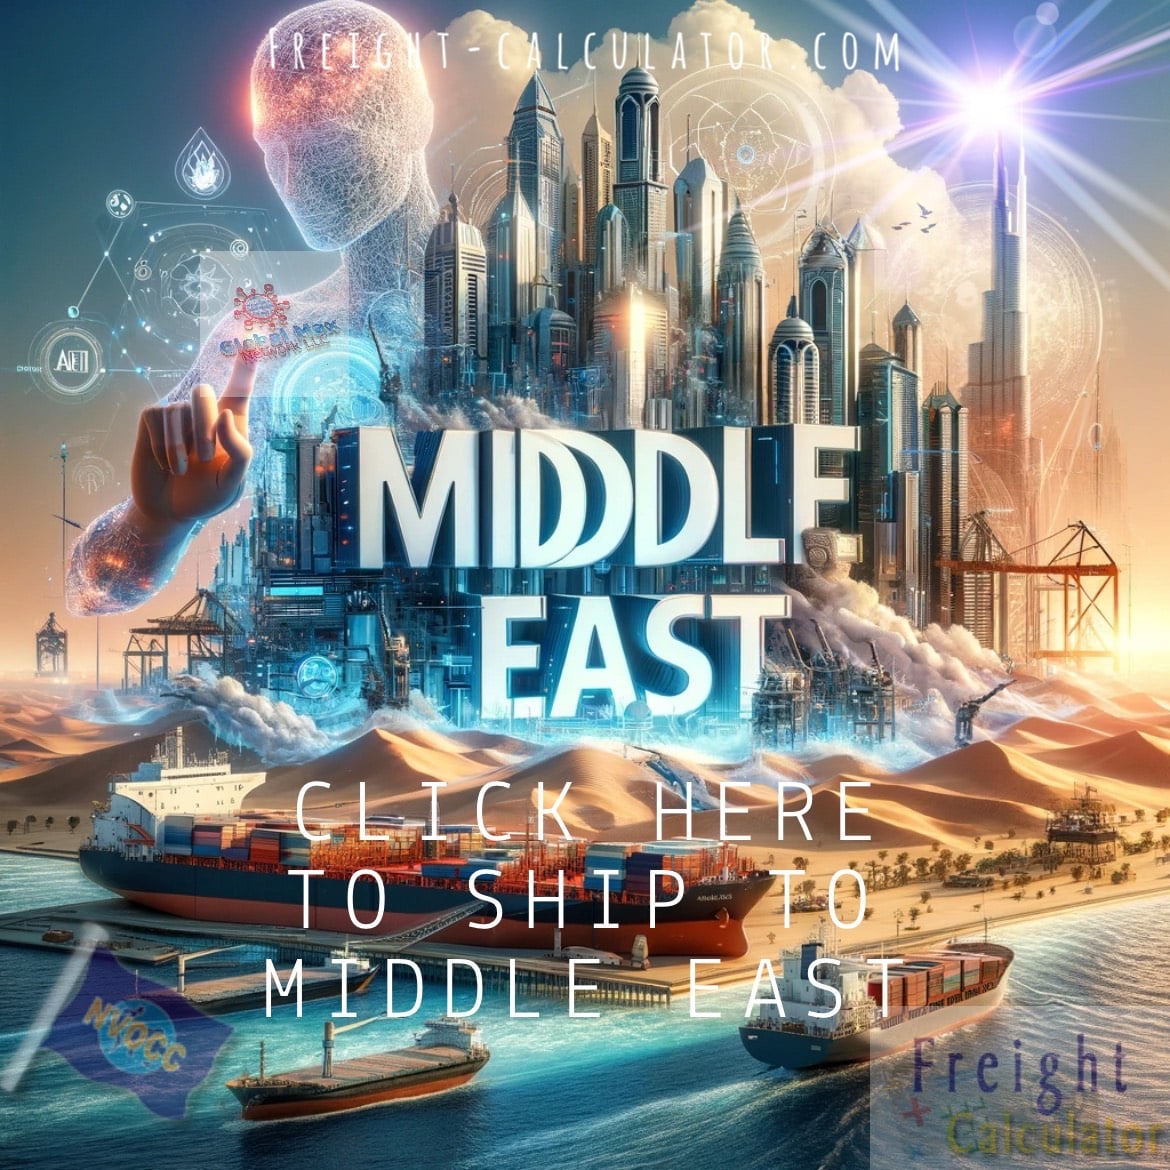 Moving Cost Comparison to Middle East